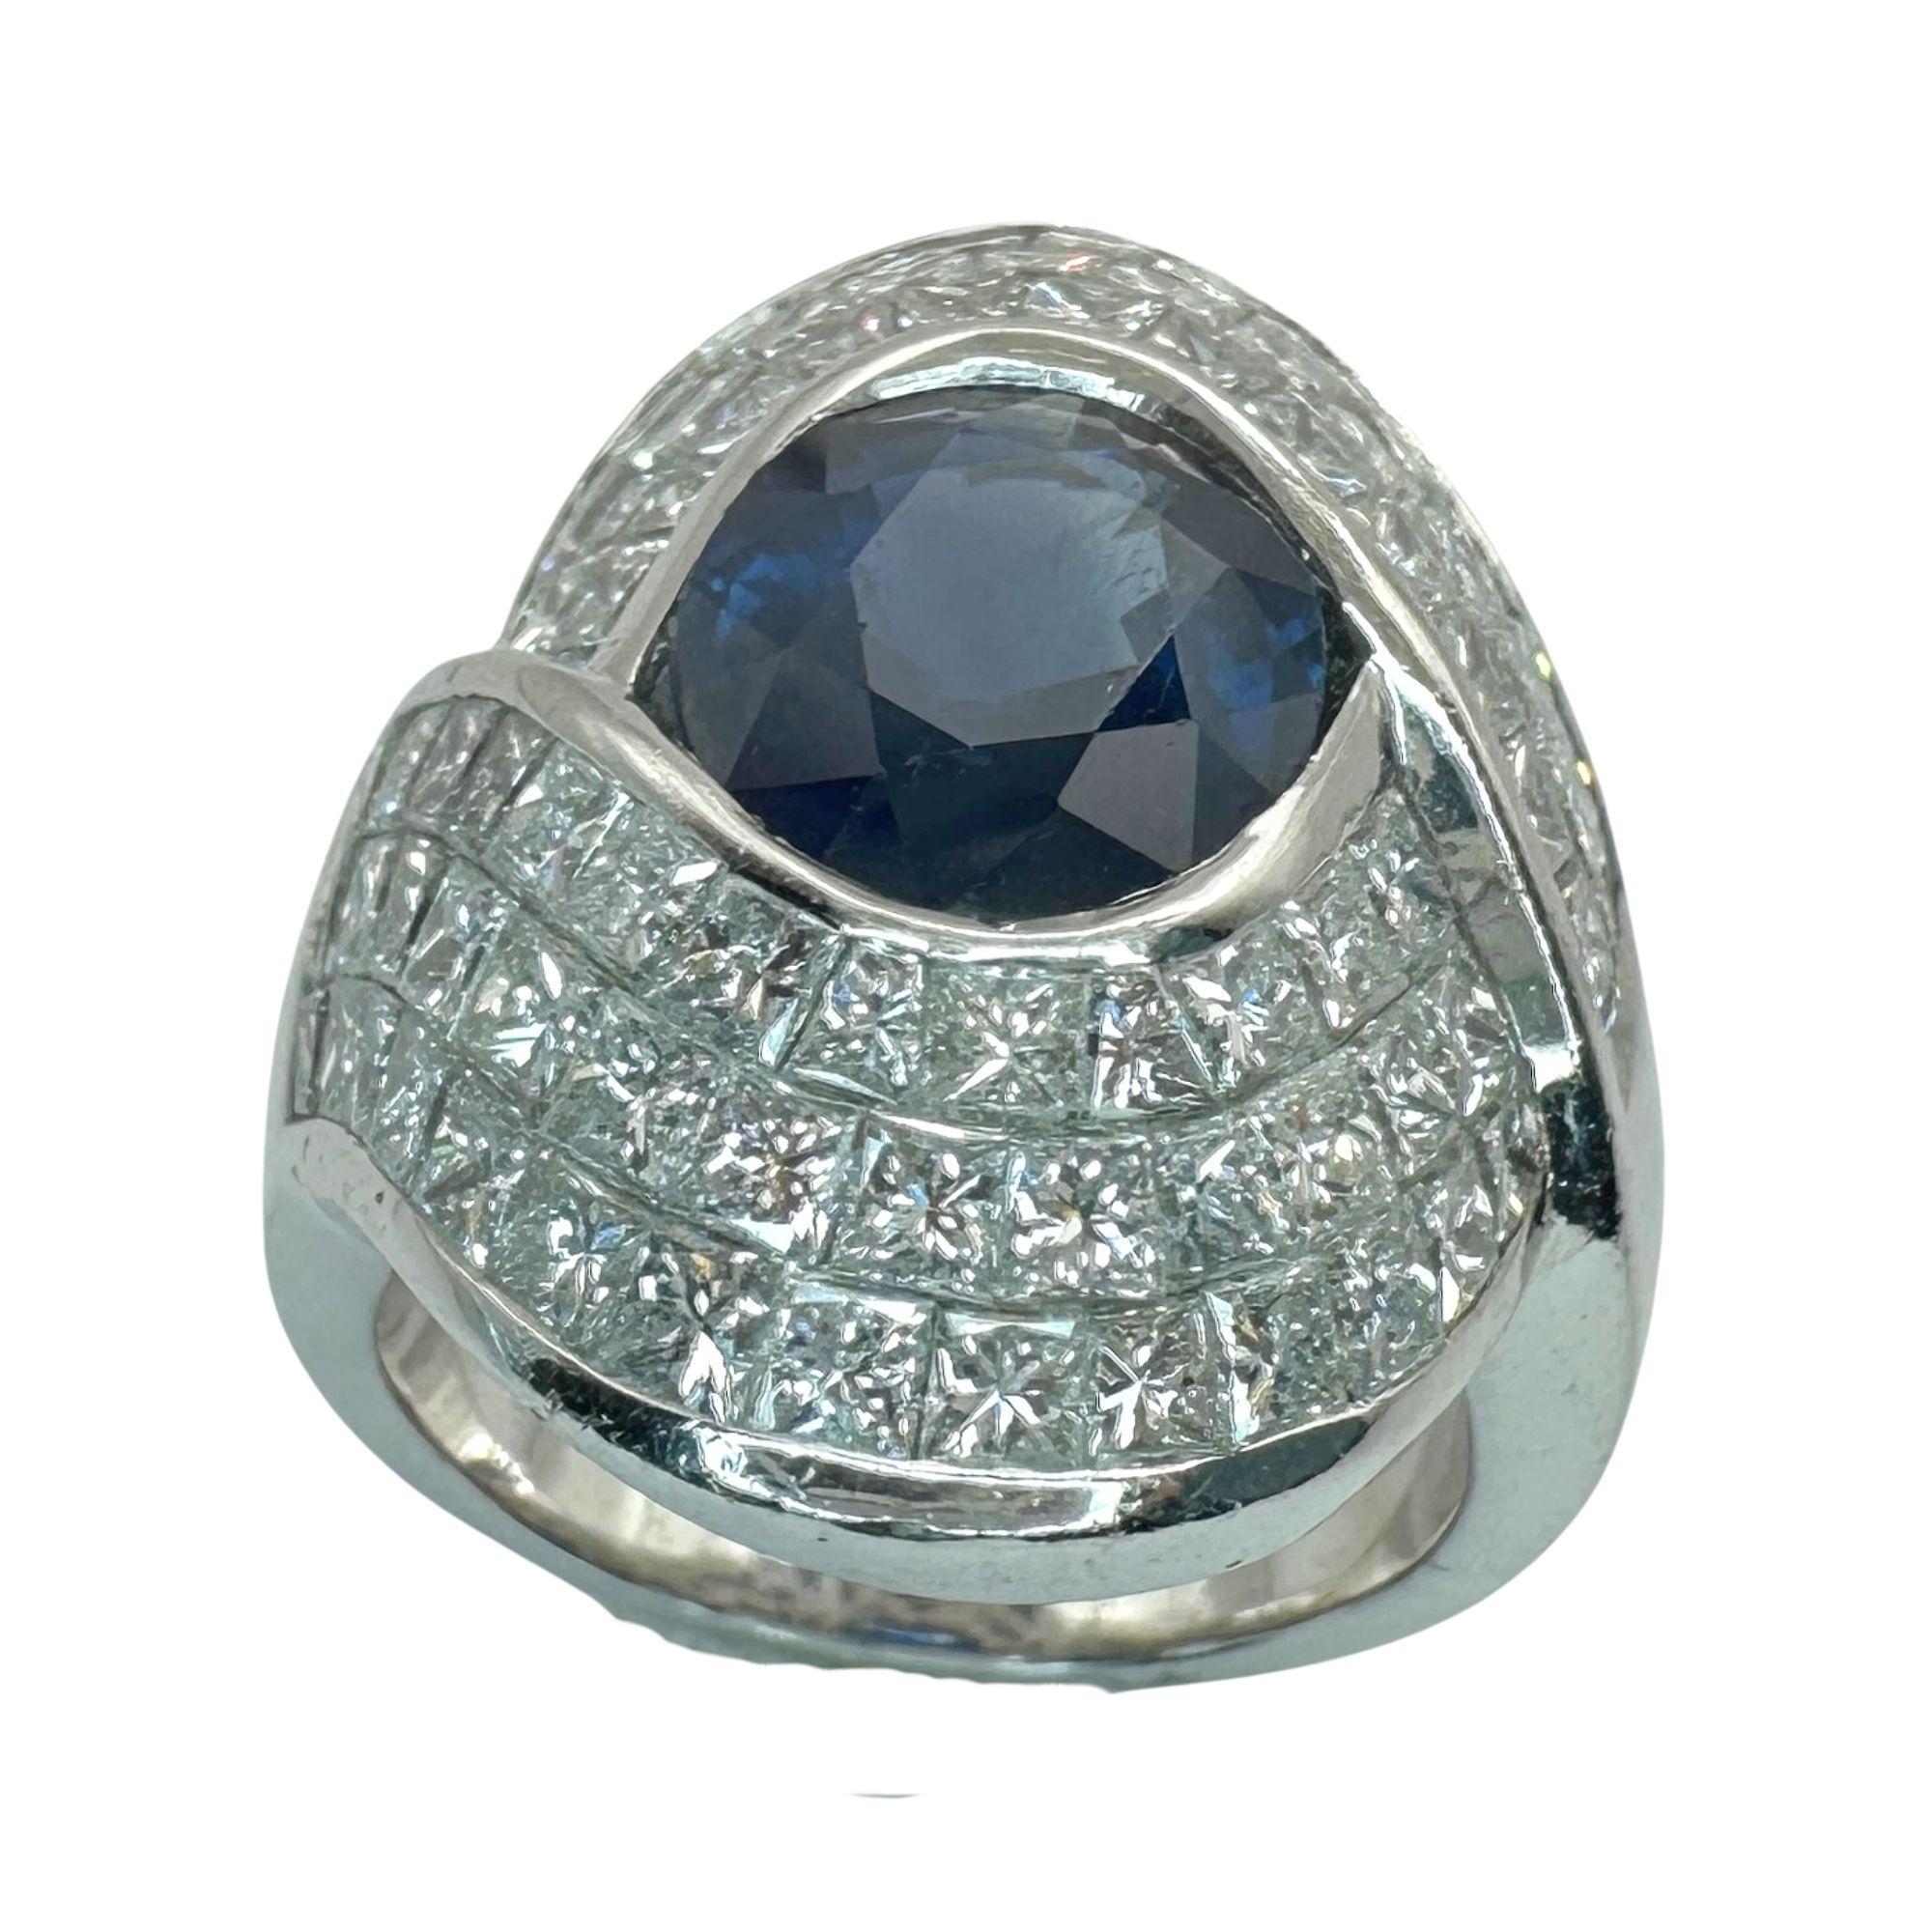 Expertly crafted, this 18k Diamond and Sapphire Ring showcases a stunning 4.40 carat center sapphire surrounded by 5.10 carats of sparkling diamonds. Made with 18k white gold and weighing 16.2 grams, this ring is a perfect balance of elegance and